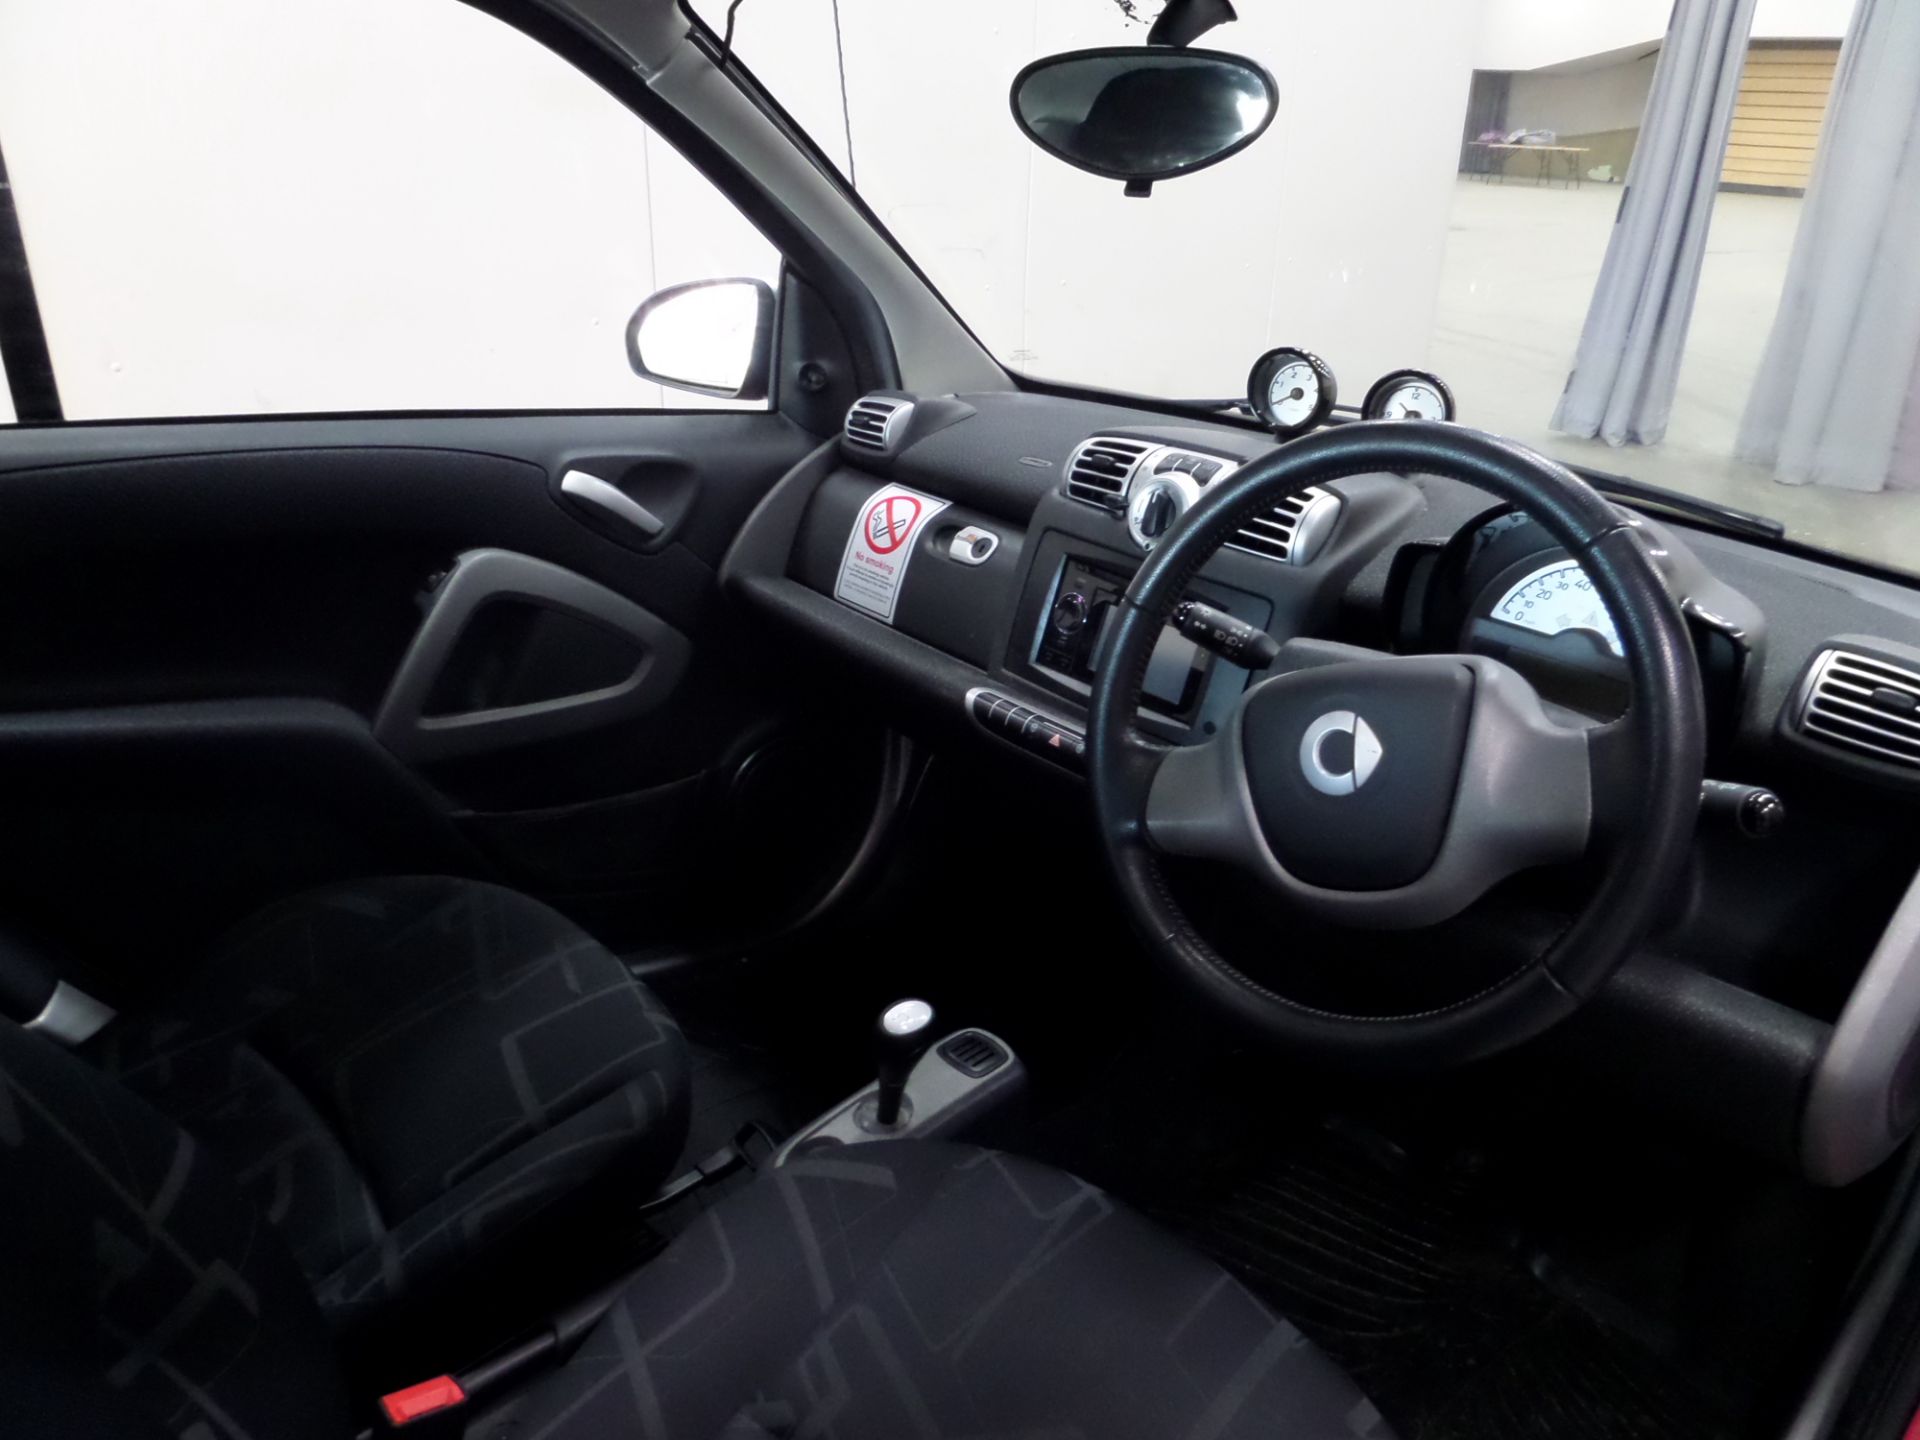 Smart Fortwo Passion Cdi 54 A - 799cc 2 Door Coupe - Image 6 of 7